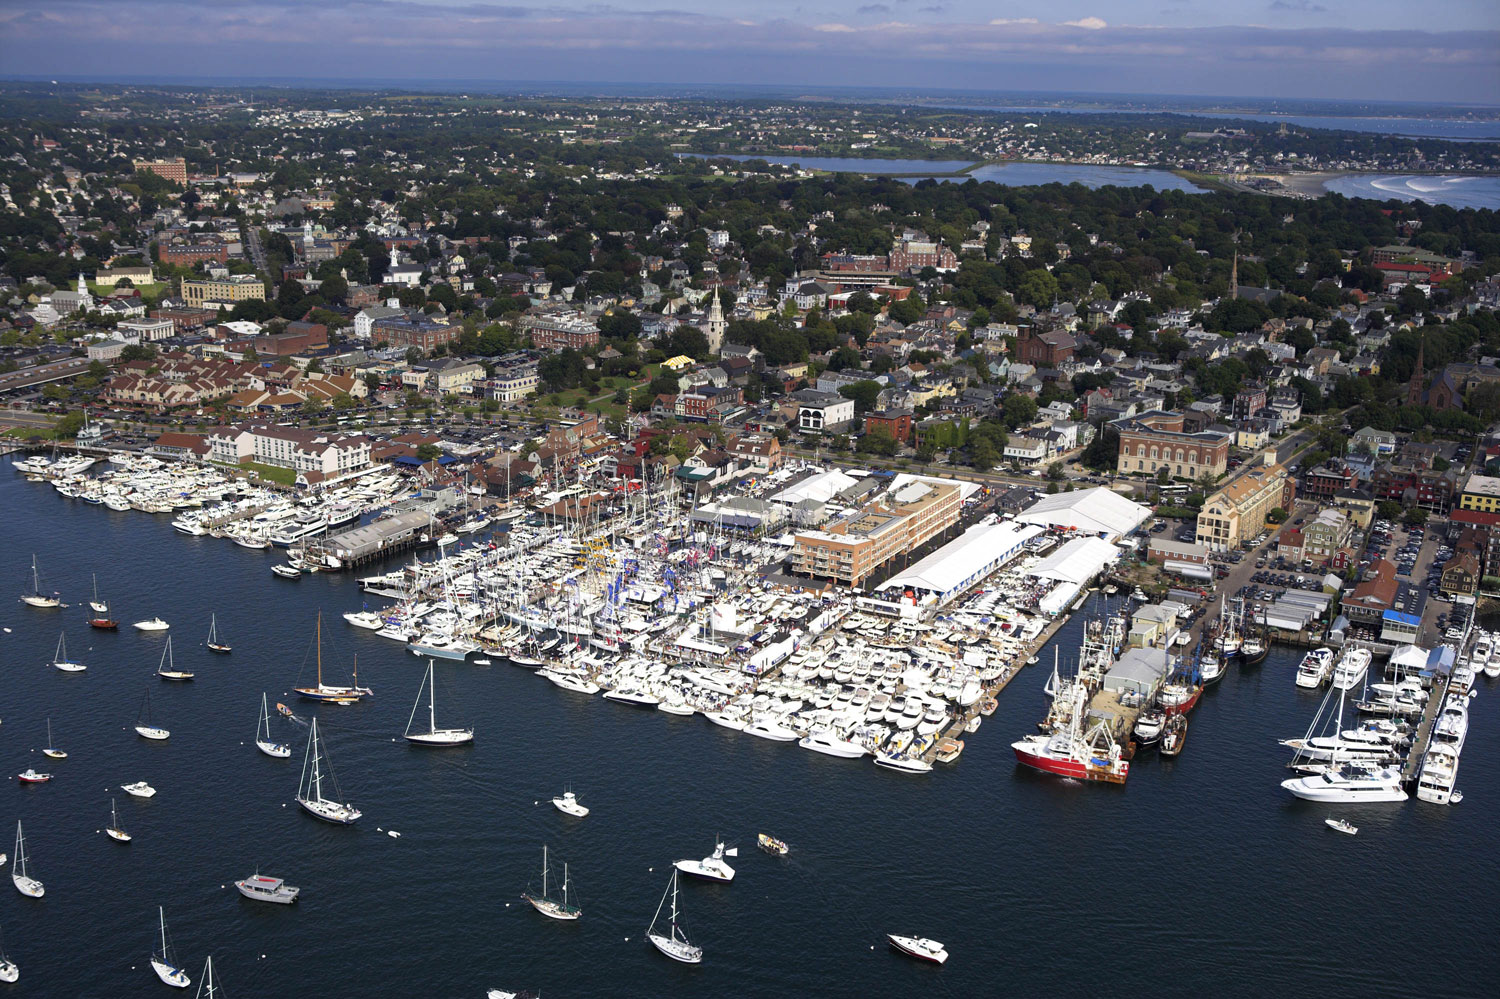 Yachts and superyachts sailing, anchored, and docked at the Newport Charter Yacht Show.